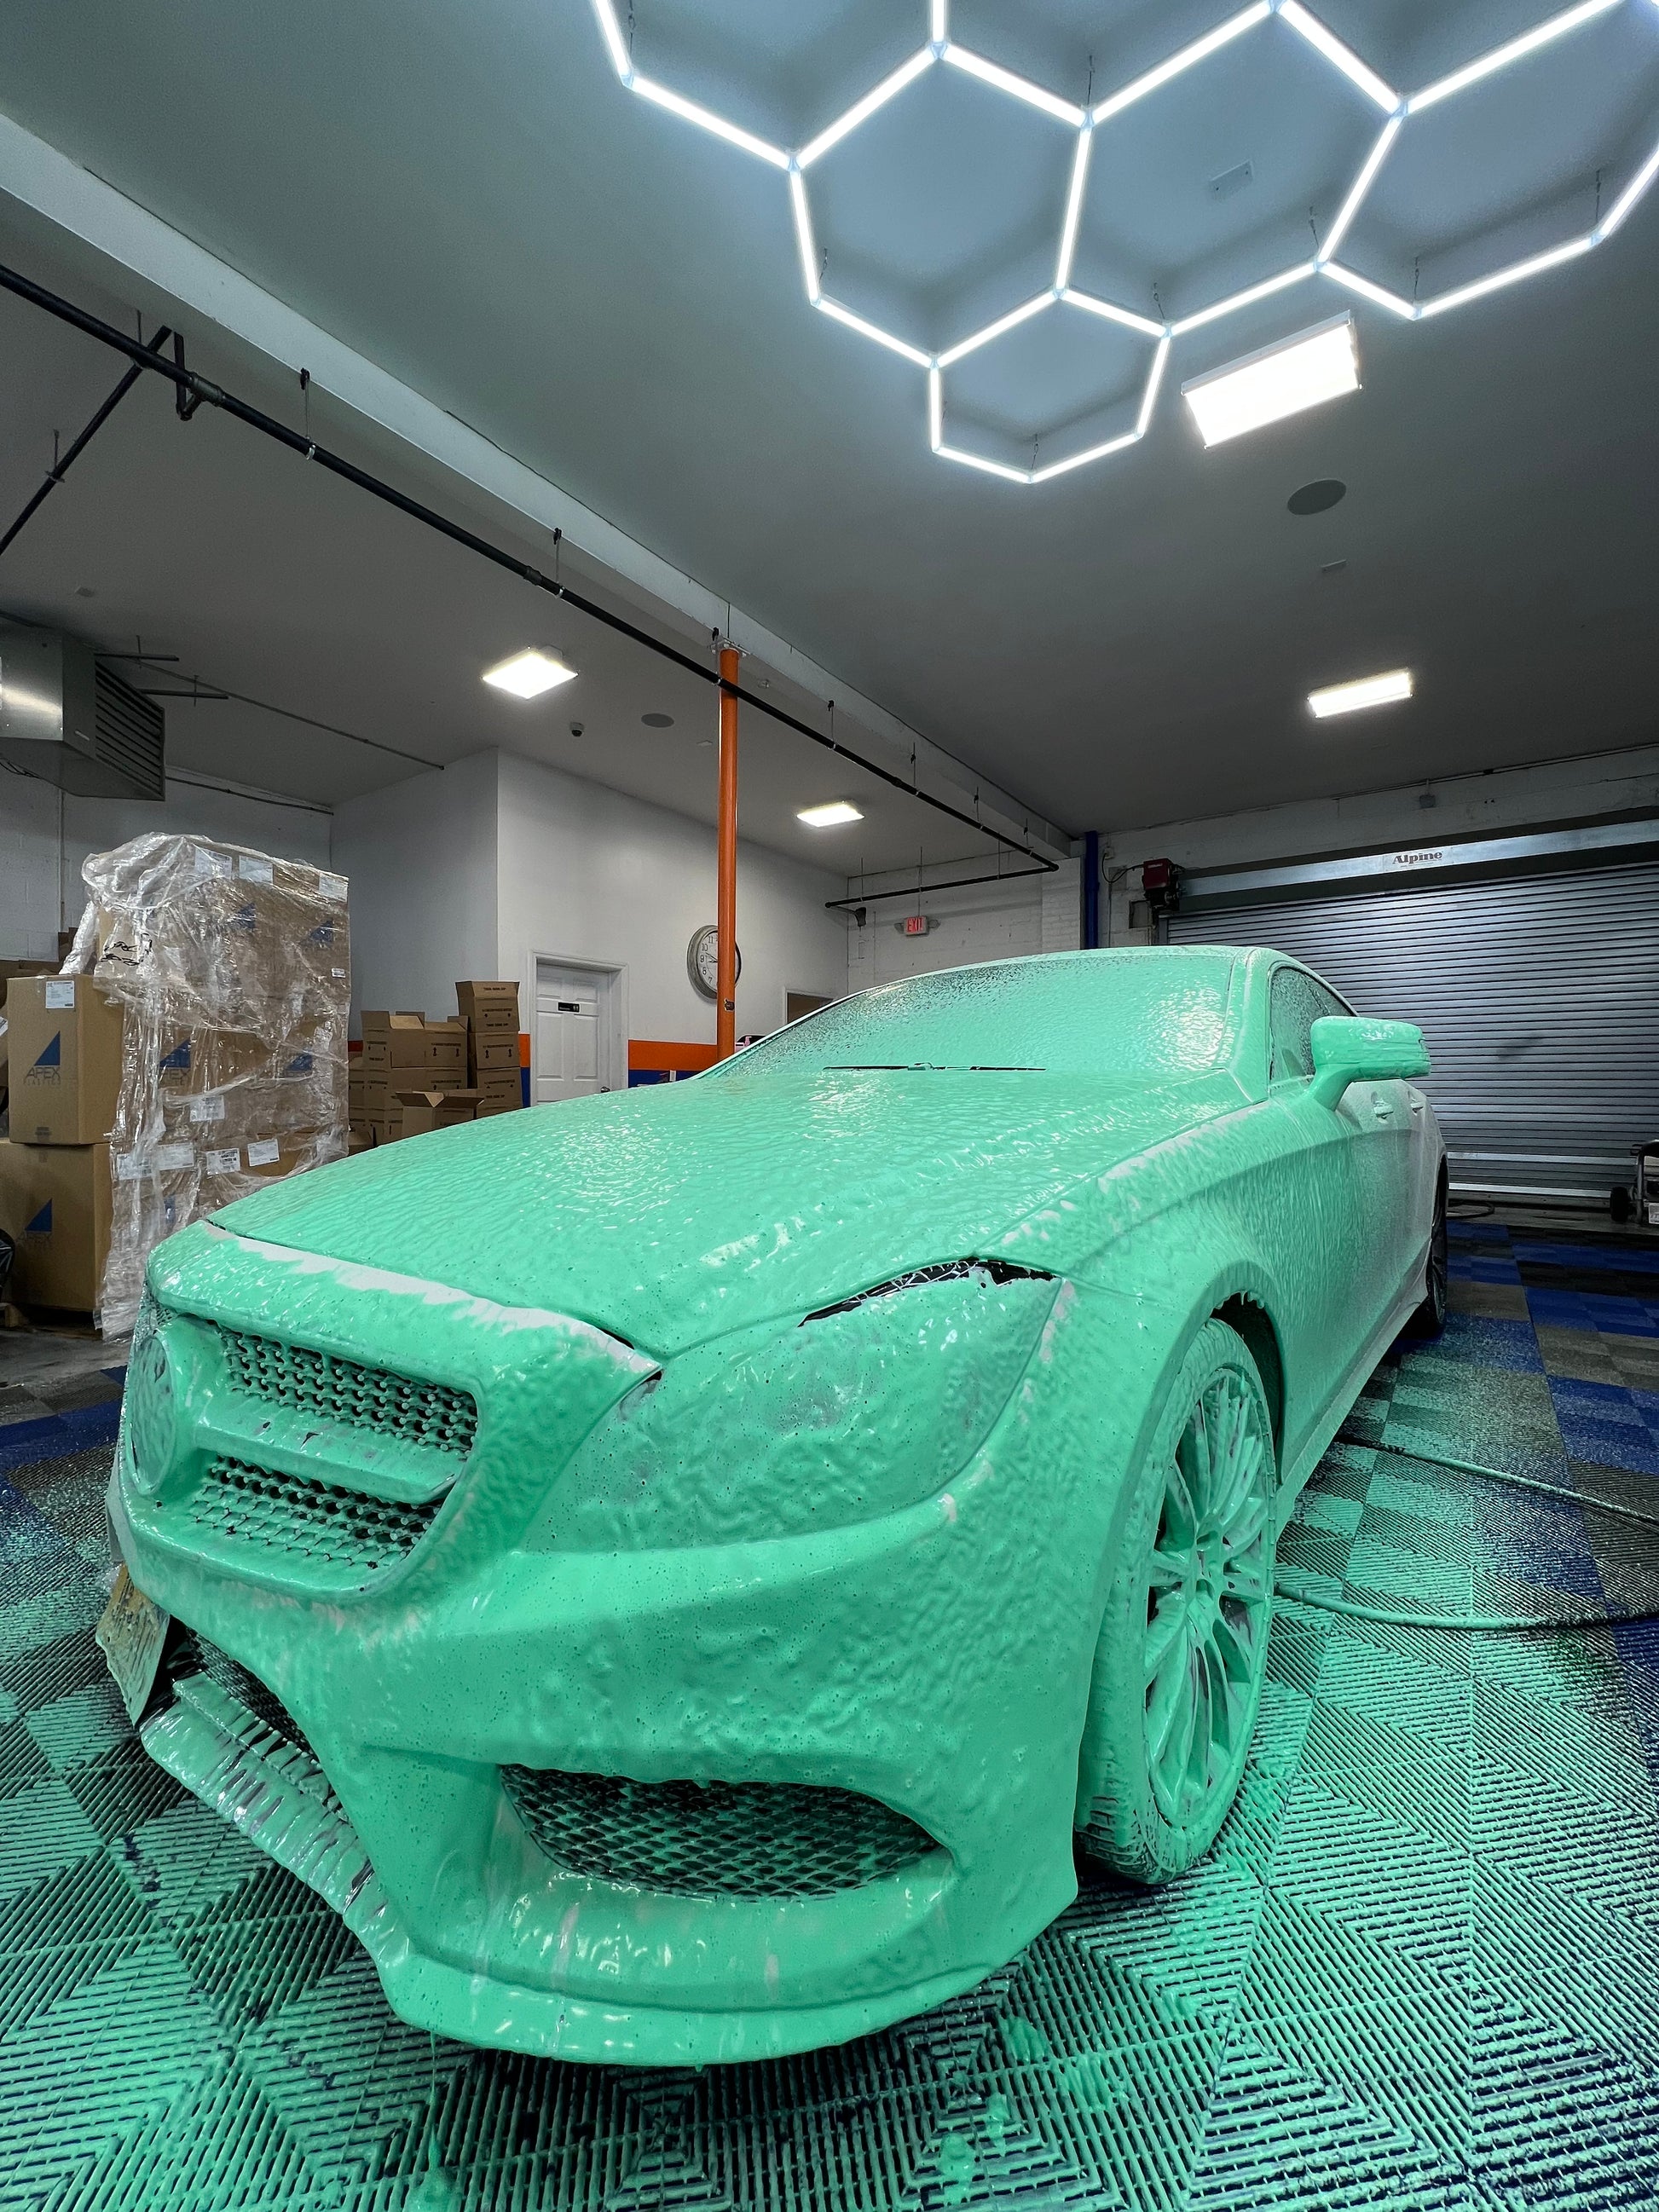 The Car Wash Express - Fourwinds - Product Spotlight- Triple Foam. Our  Triple Foam is a high sudsing foam polish that gives your car paint that  added shine. It is biodegradable, and